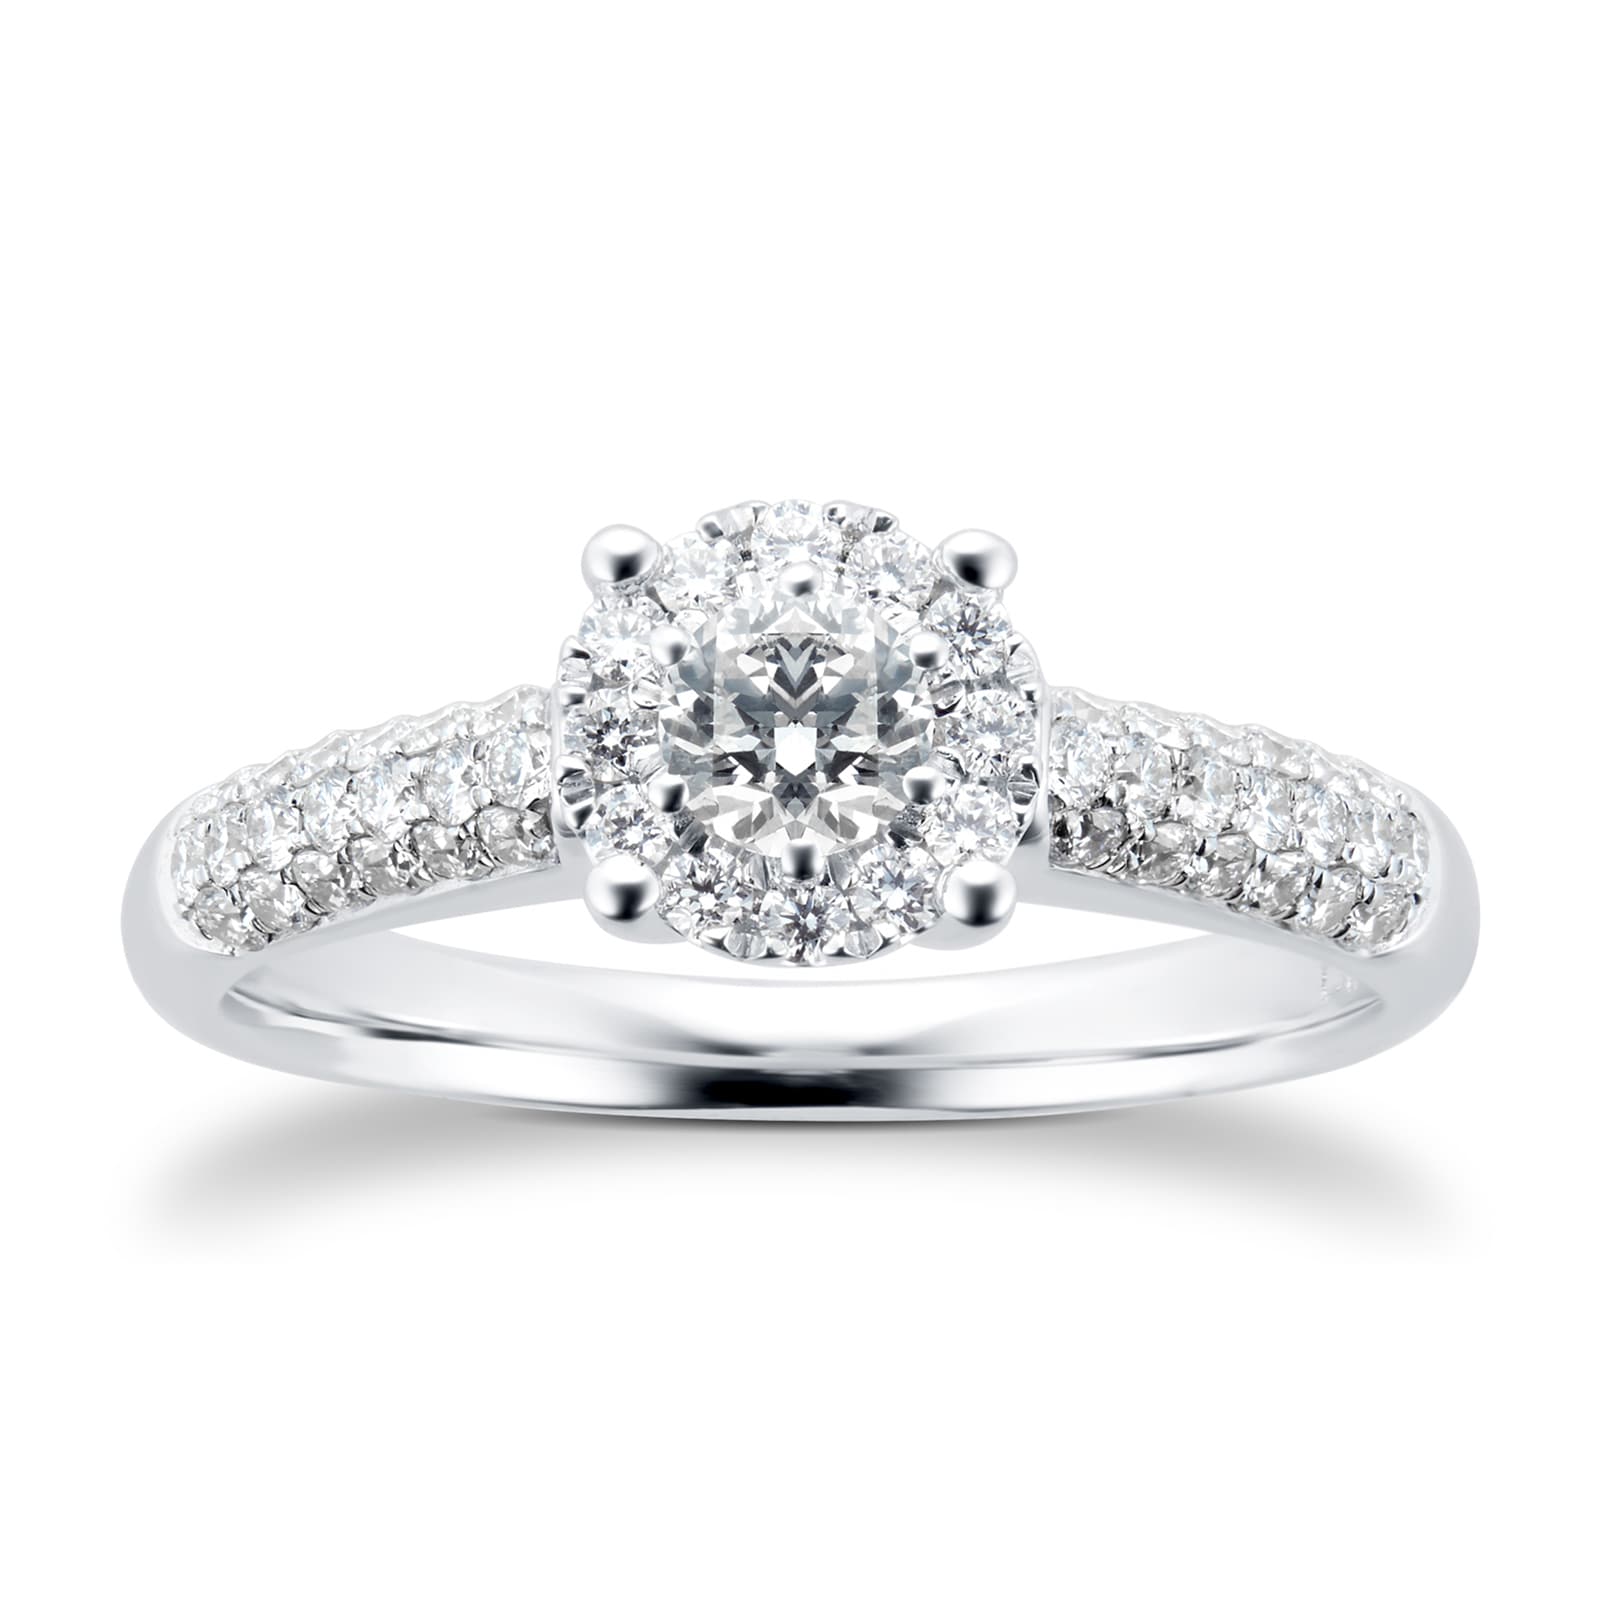 Brilliant Cut 0.48 Total Carat Weight Cluster And Diamond Set Shoulders Ring Set In 9 Carat White Gold - Ring Size M